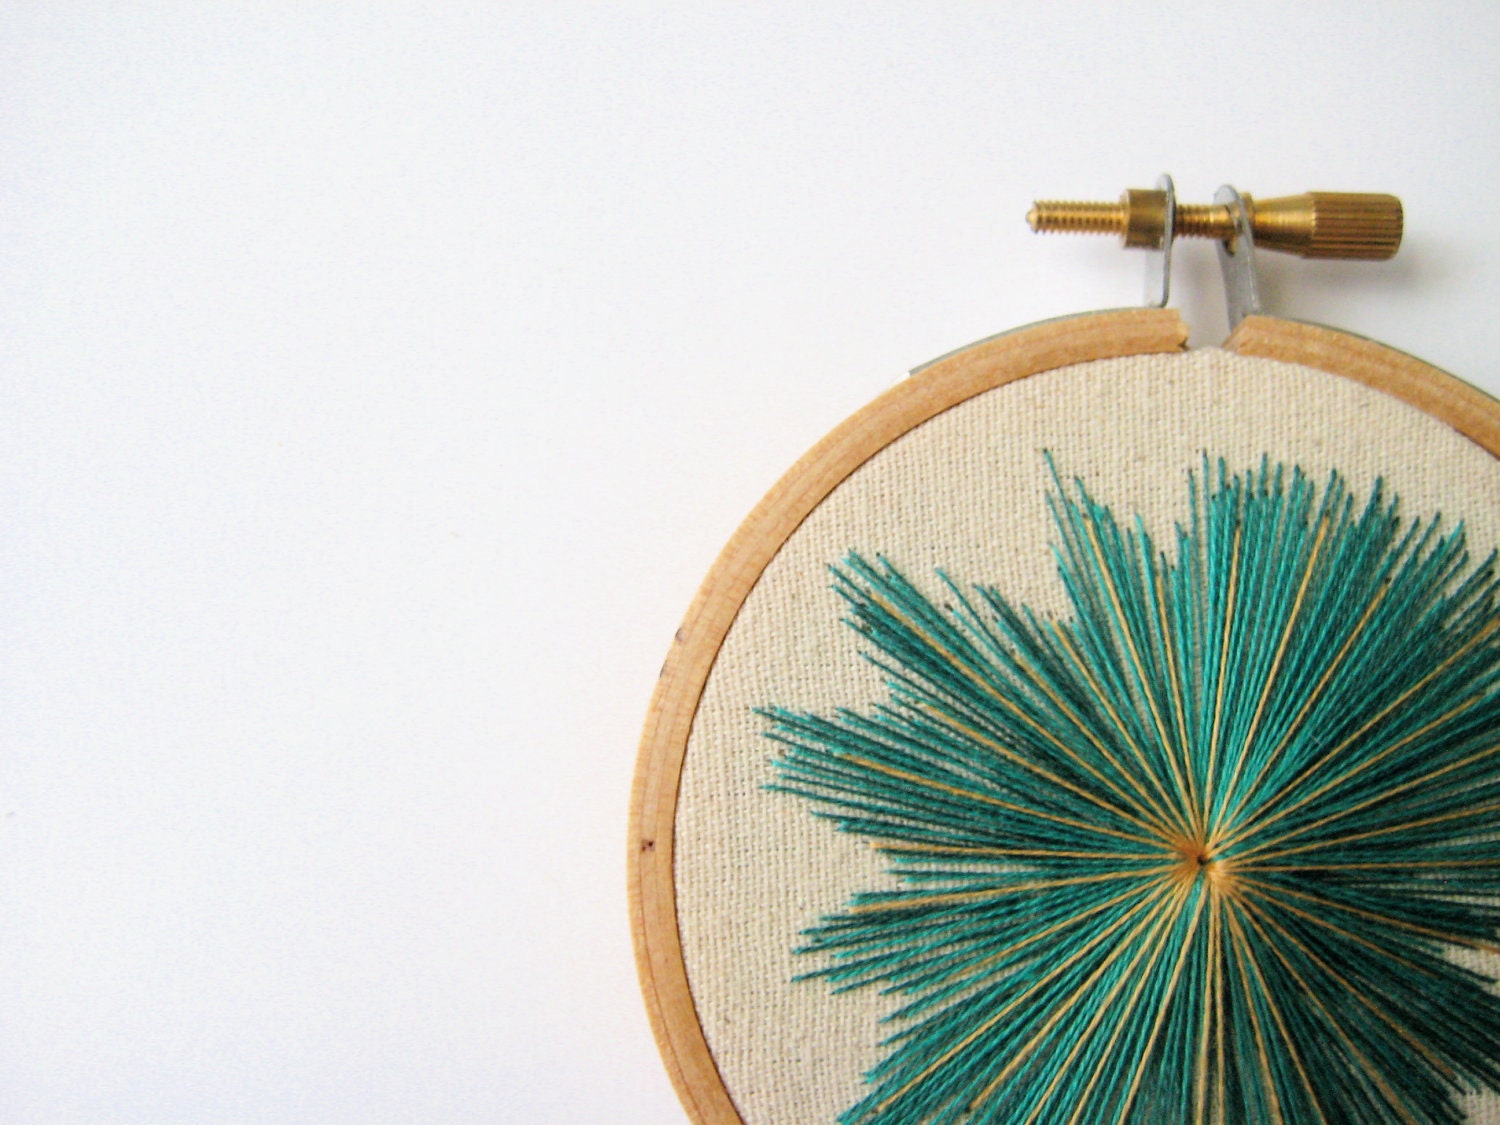 Teal, Blue and Gold Starburst Embroidery Hoop Art - IFeltFuzzy